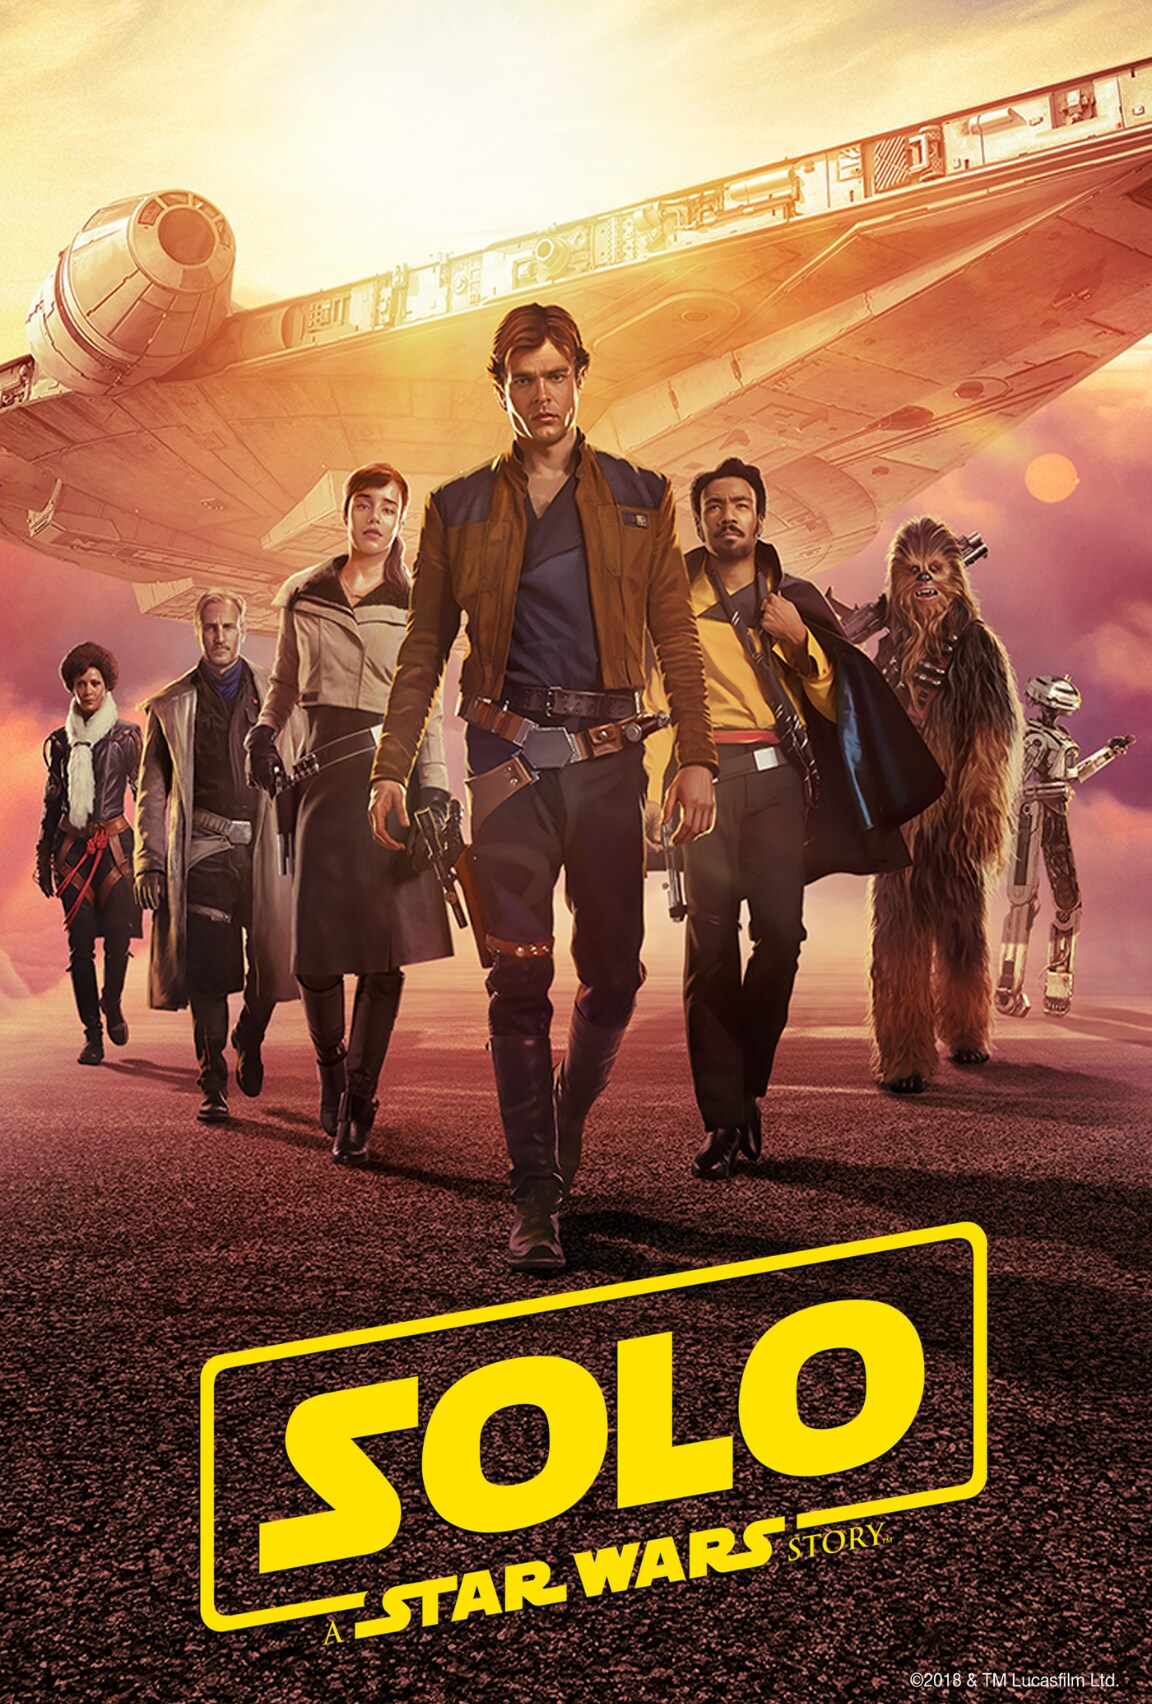 The 'Solo: A Star Wars Story' poster featuring Han Solo, Chewbacca and a range of other cast members with the Millennium Falcon in the background on the ground.